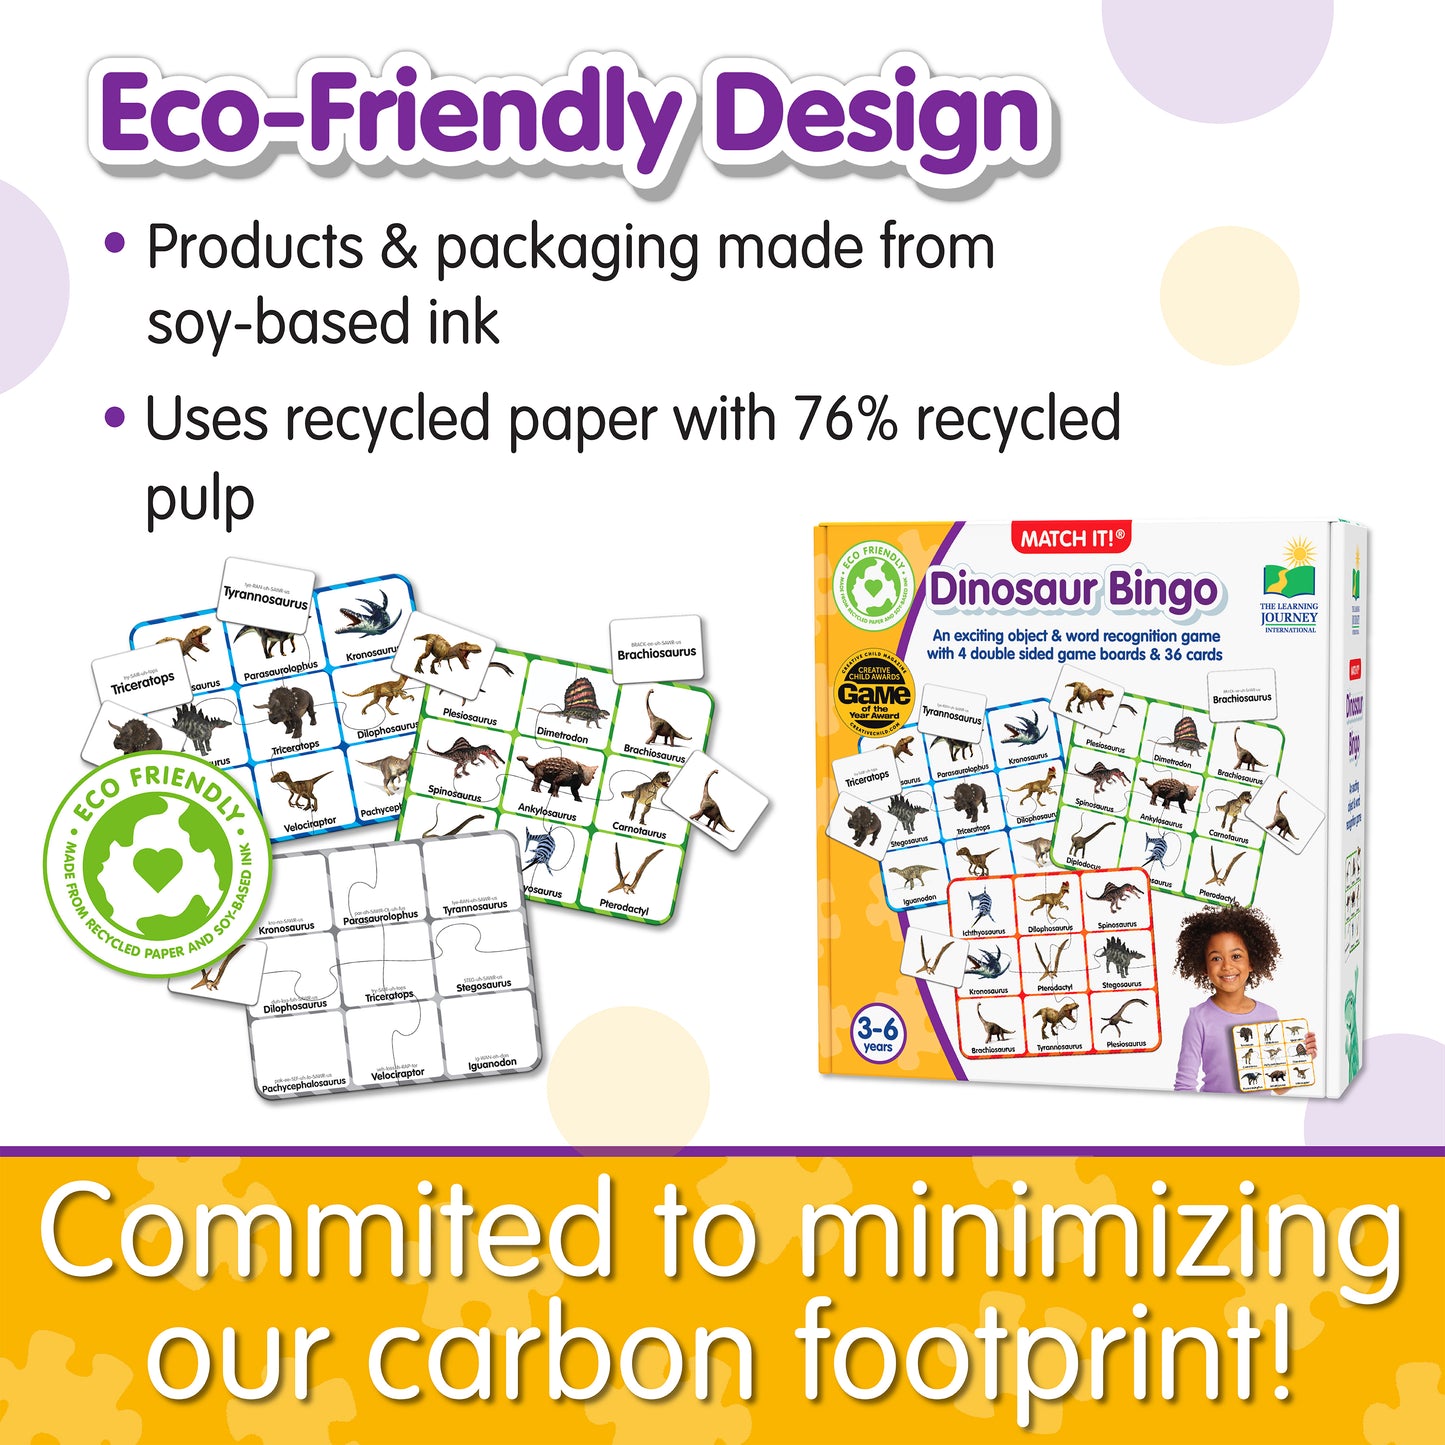 Infographic about Match It - Dinosaur Bingo's eco-friendly design that says, "Committed to minimizing our carbon footprint!"